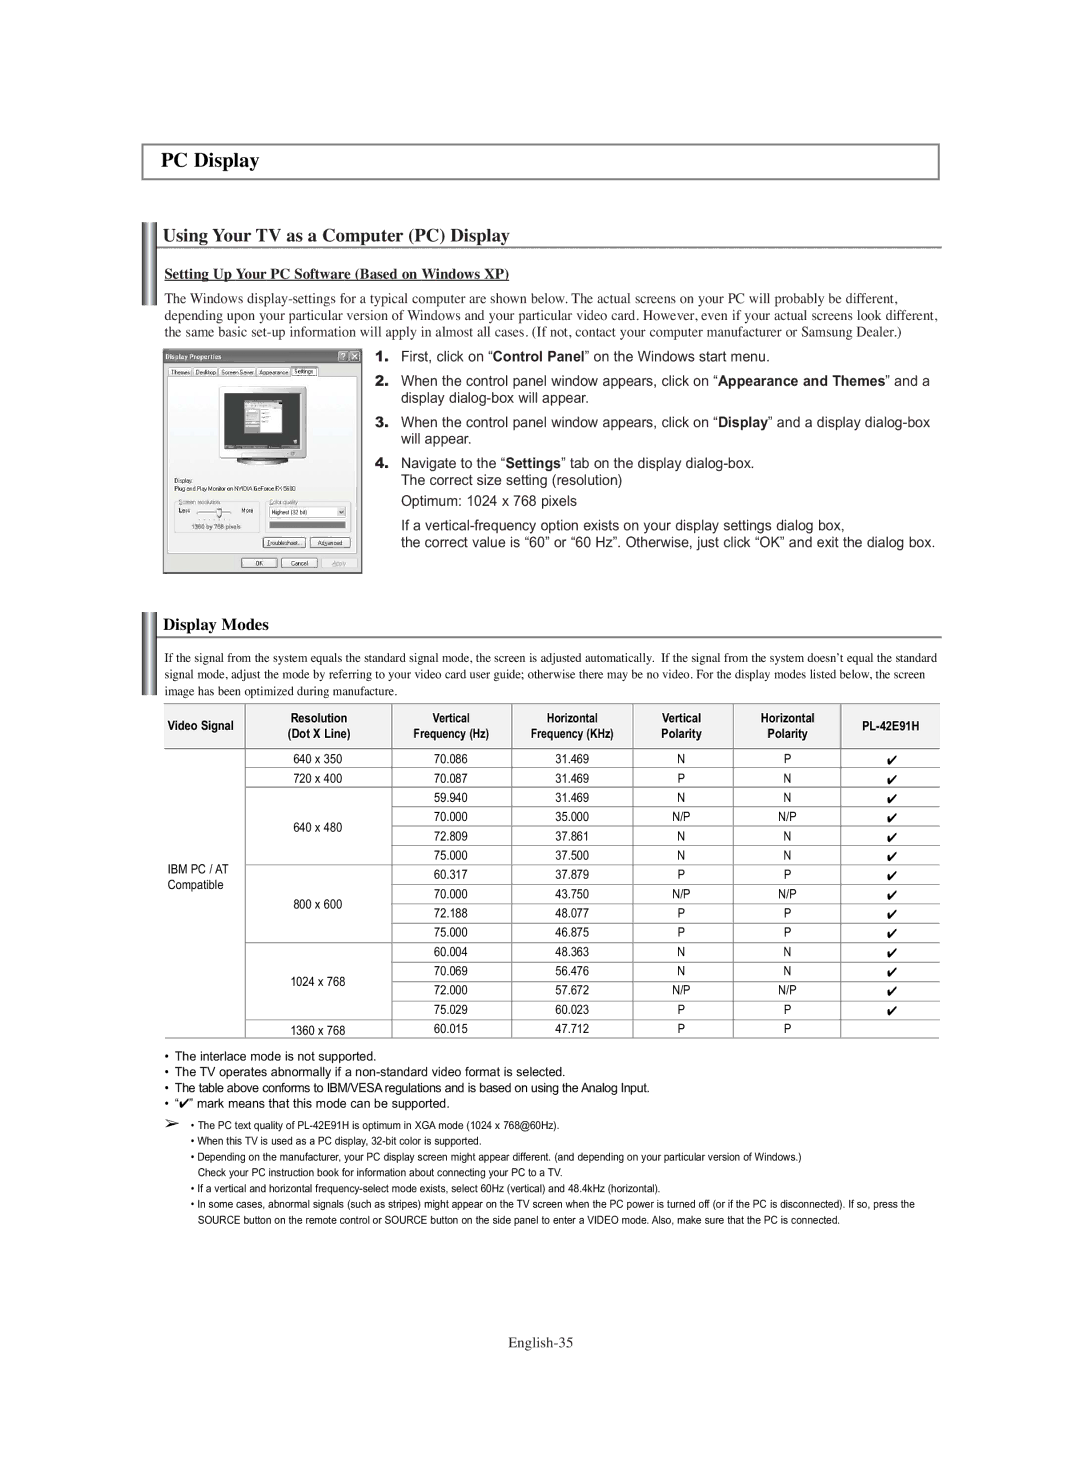 Samsung manual PC Display, Setting Up Your PC Software Based on Windows XP, Resolution Vertical Horizontal PL-42E91H 